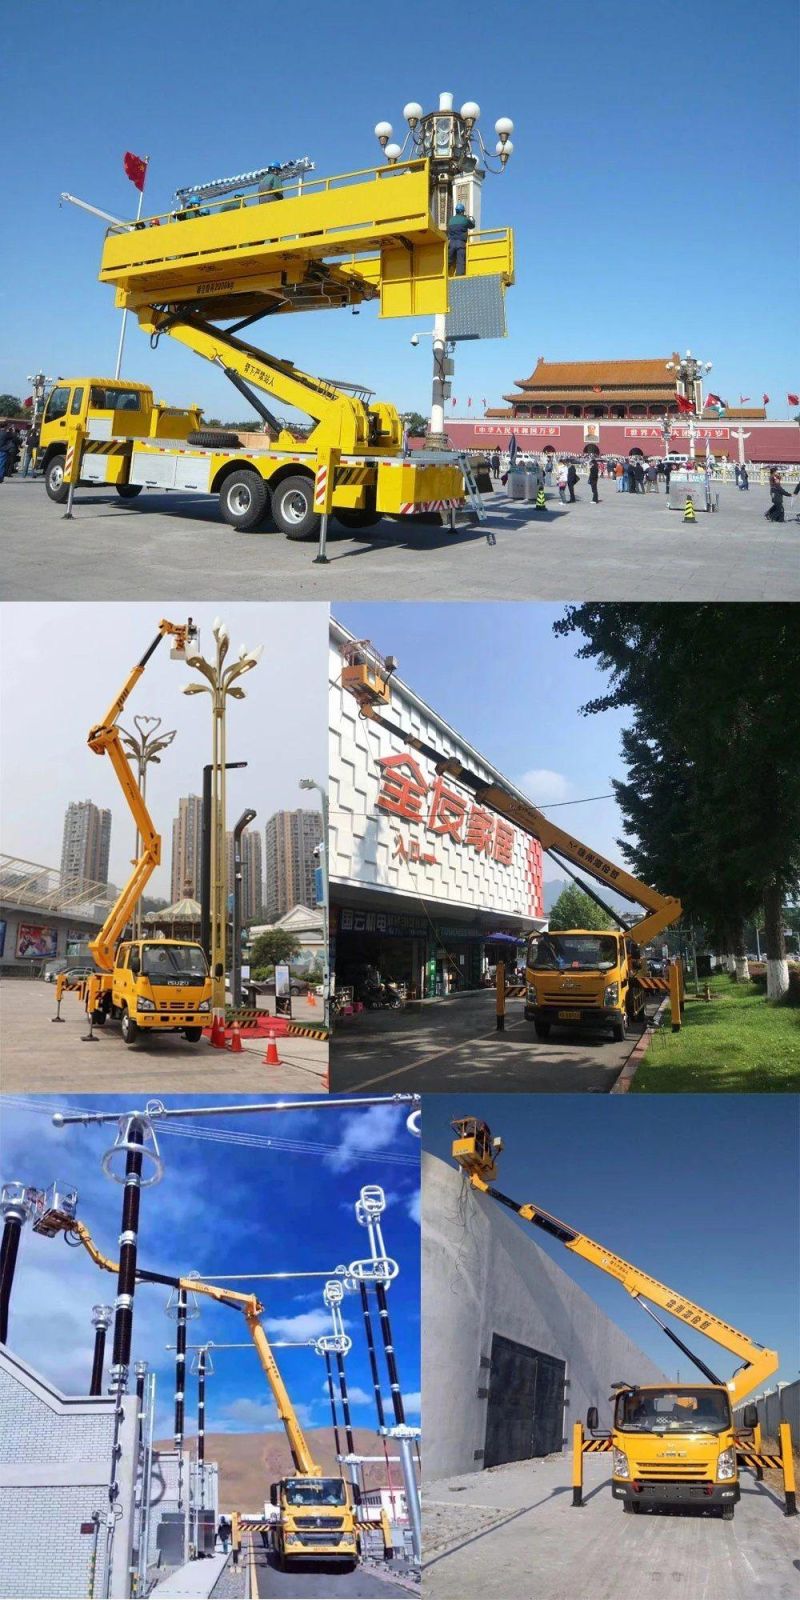 Hot Sale High Quality Telescopic Folding Arm Lift Mobile Trailer Model Articulated Boom Lift Tables Trucks 20meters 22meters 24meters Articulated Cherry Picker